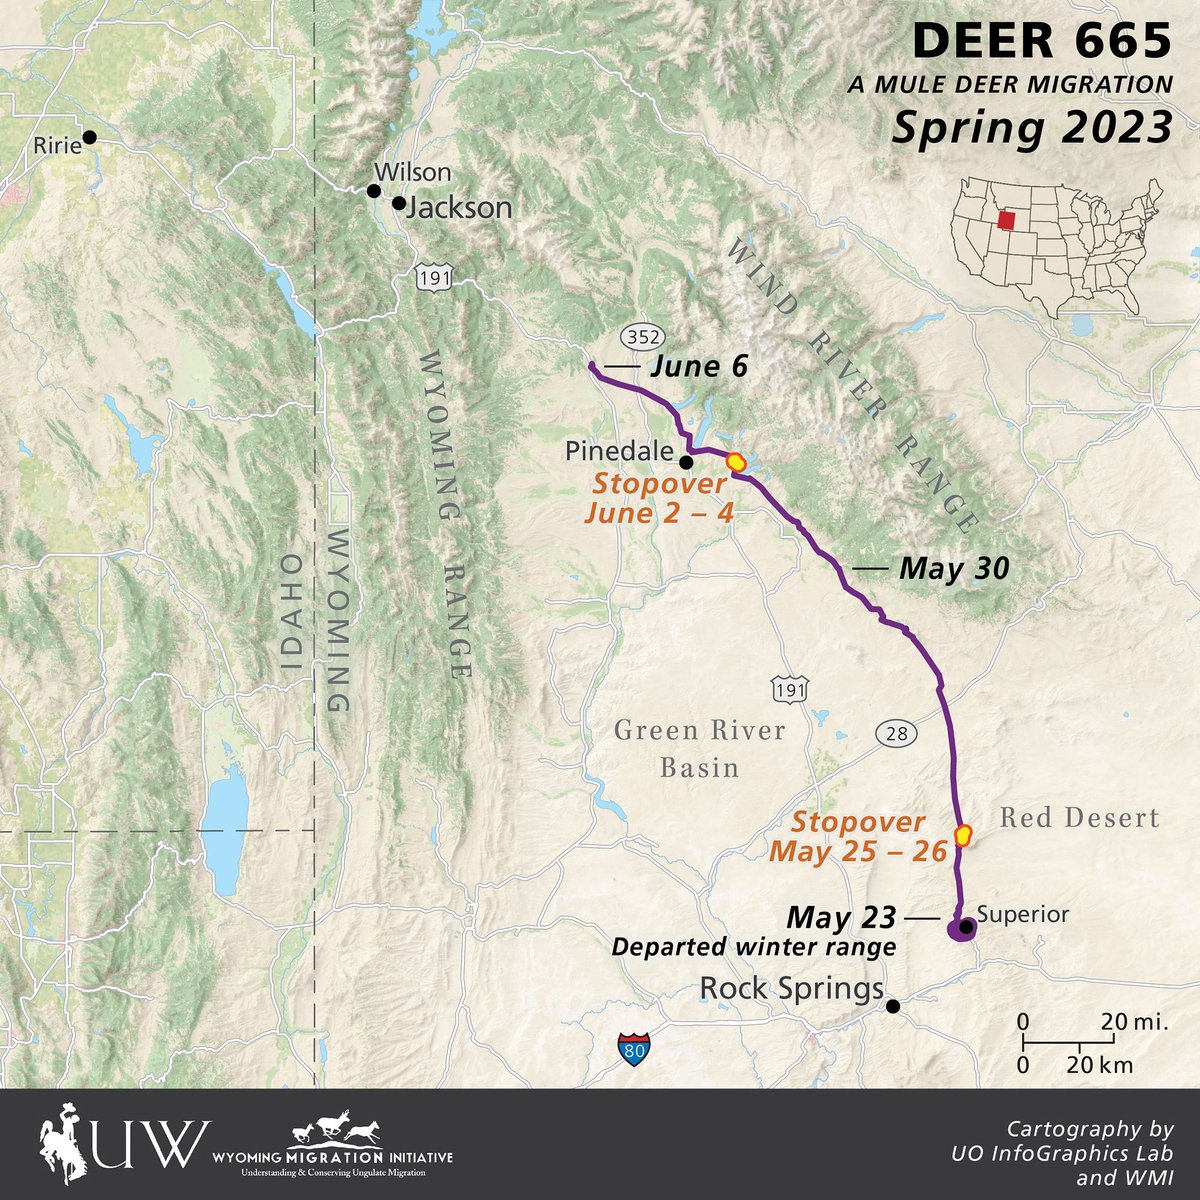 Migration update! In week 2 of #Deer665's migration, she swam raging rivers, jumped myriad fences, and zipped across two highways. She stopped over for two days near Boulder Lake. On June 5-6 she made 15 miles in 10 hours. 60 miles this week, 120 total.  #wyodeer #deer